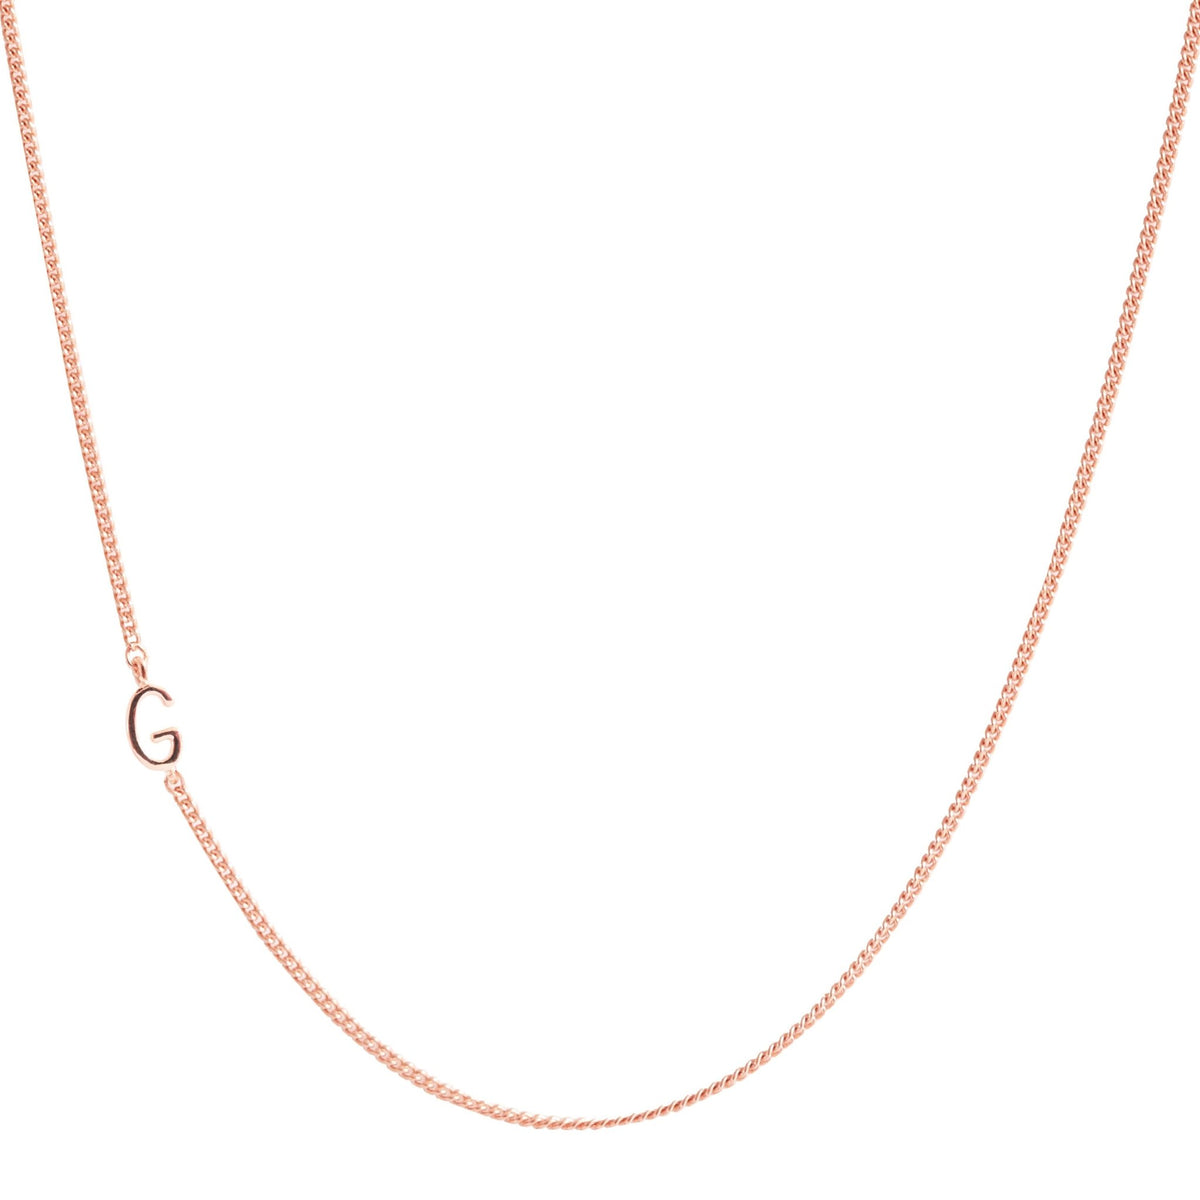 NOTABLE OFFSET INITIAL NECKLACE - G - GOLD, ROSE GOLD, OR SILVER - SO PRETTY CARA COTTER